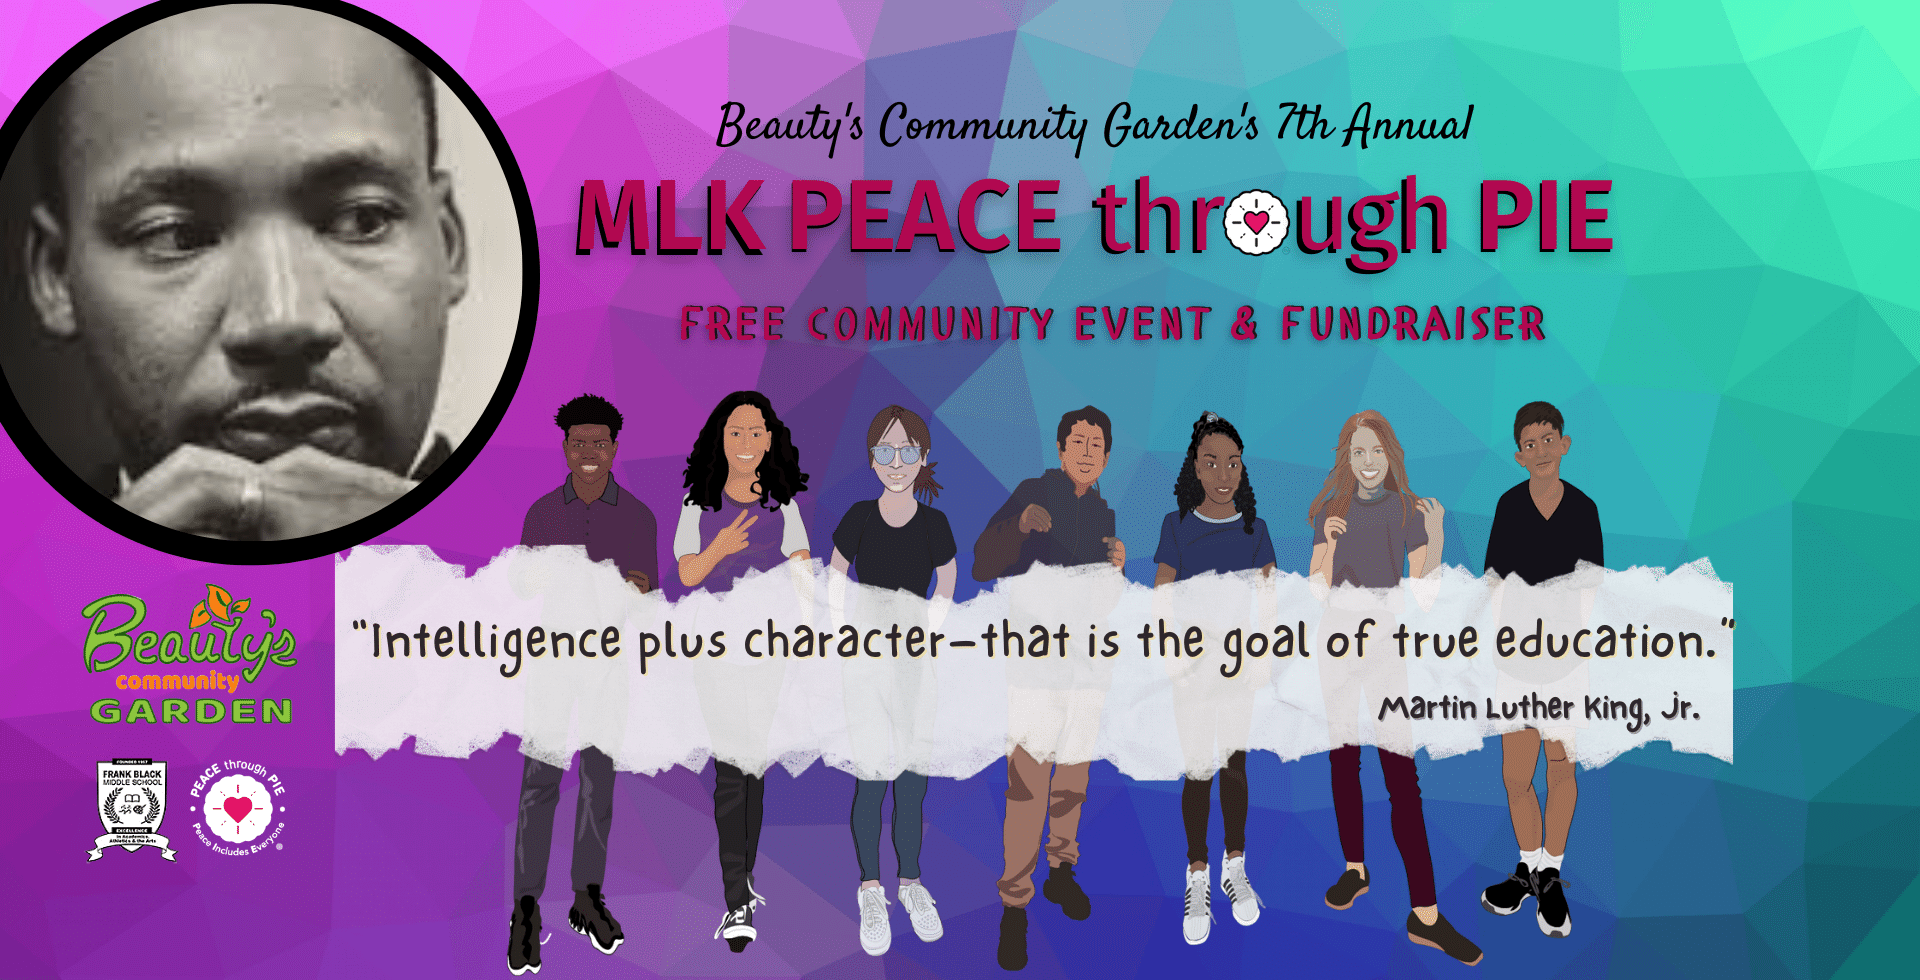 Image for MLK PEACE through PIE 2023 event and fundraiser. MLK quote "Intelligence plus character–that is the goal of true education.”